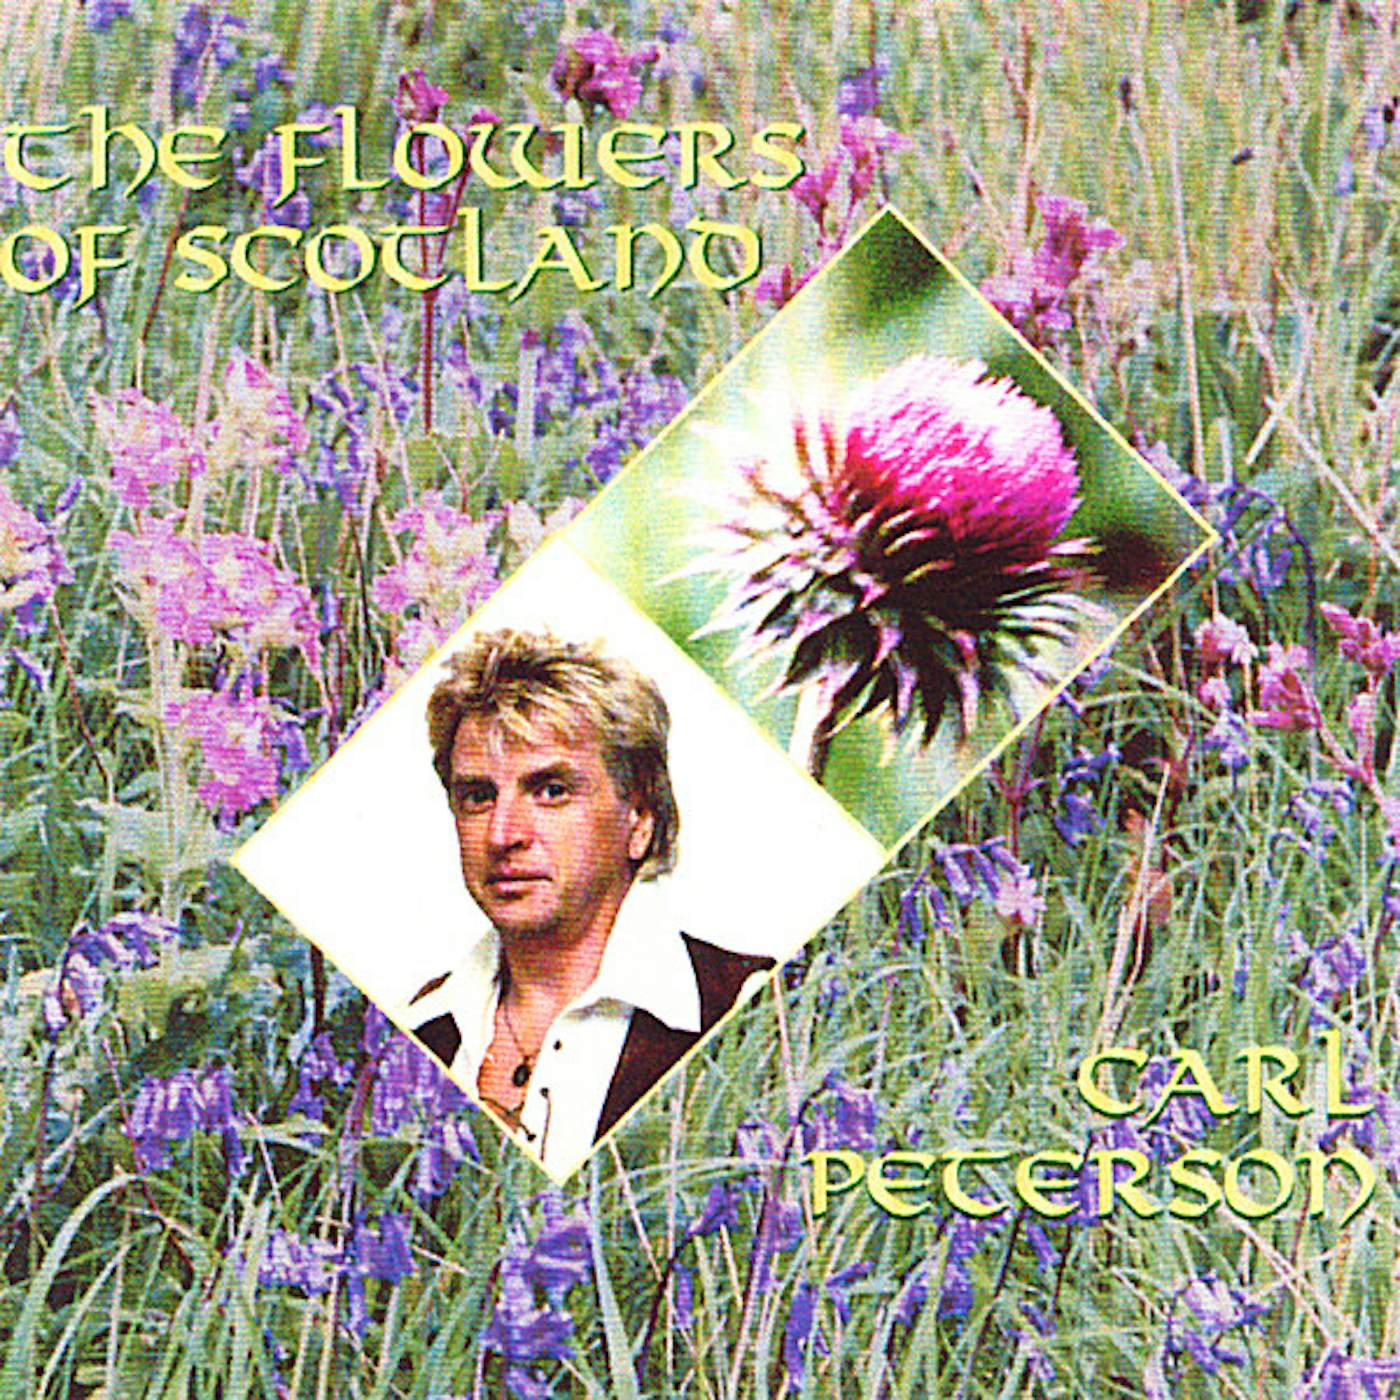 Carl Peterson FLOWERS OF SCOTLAND CD